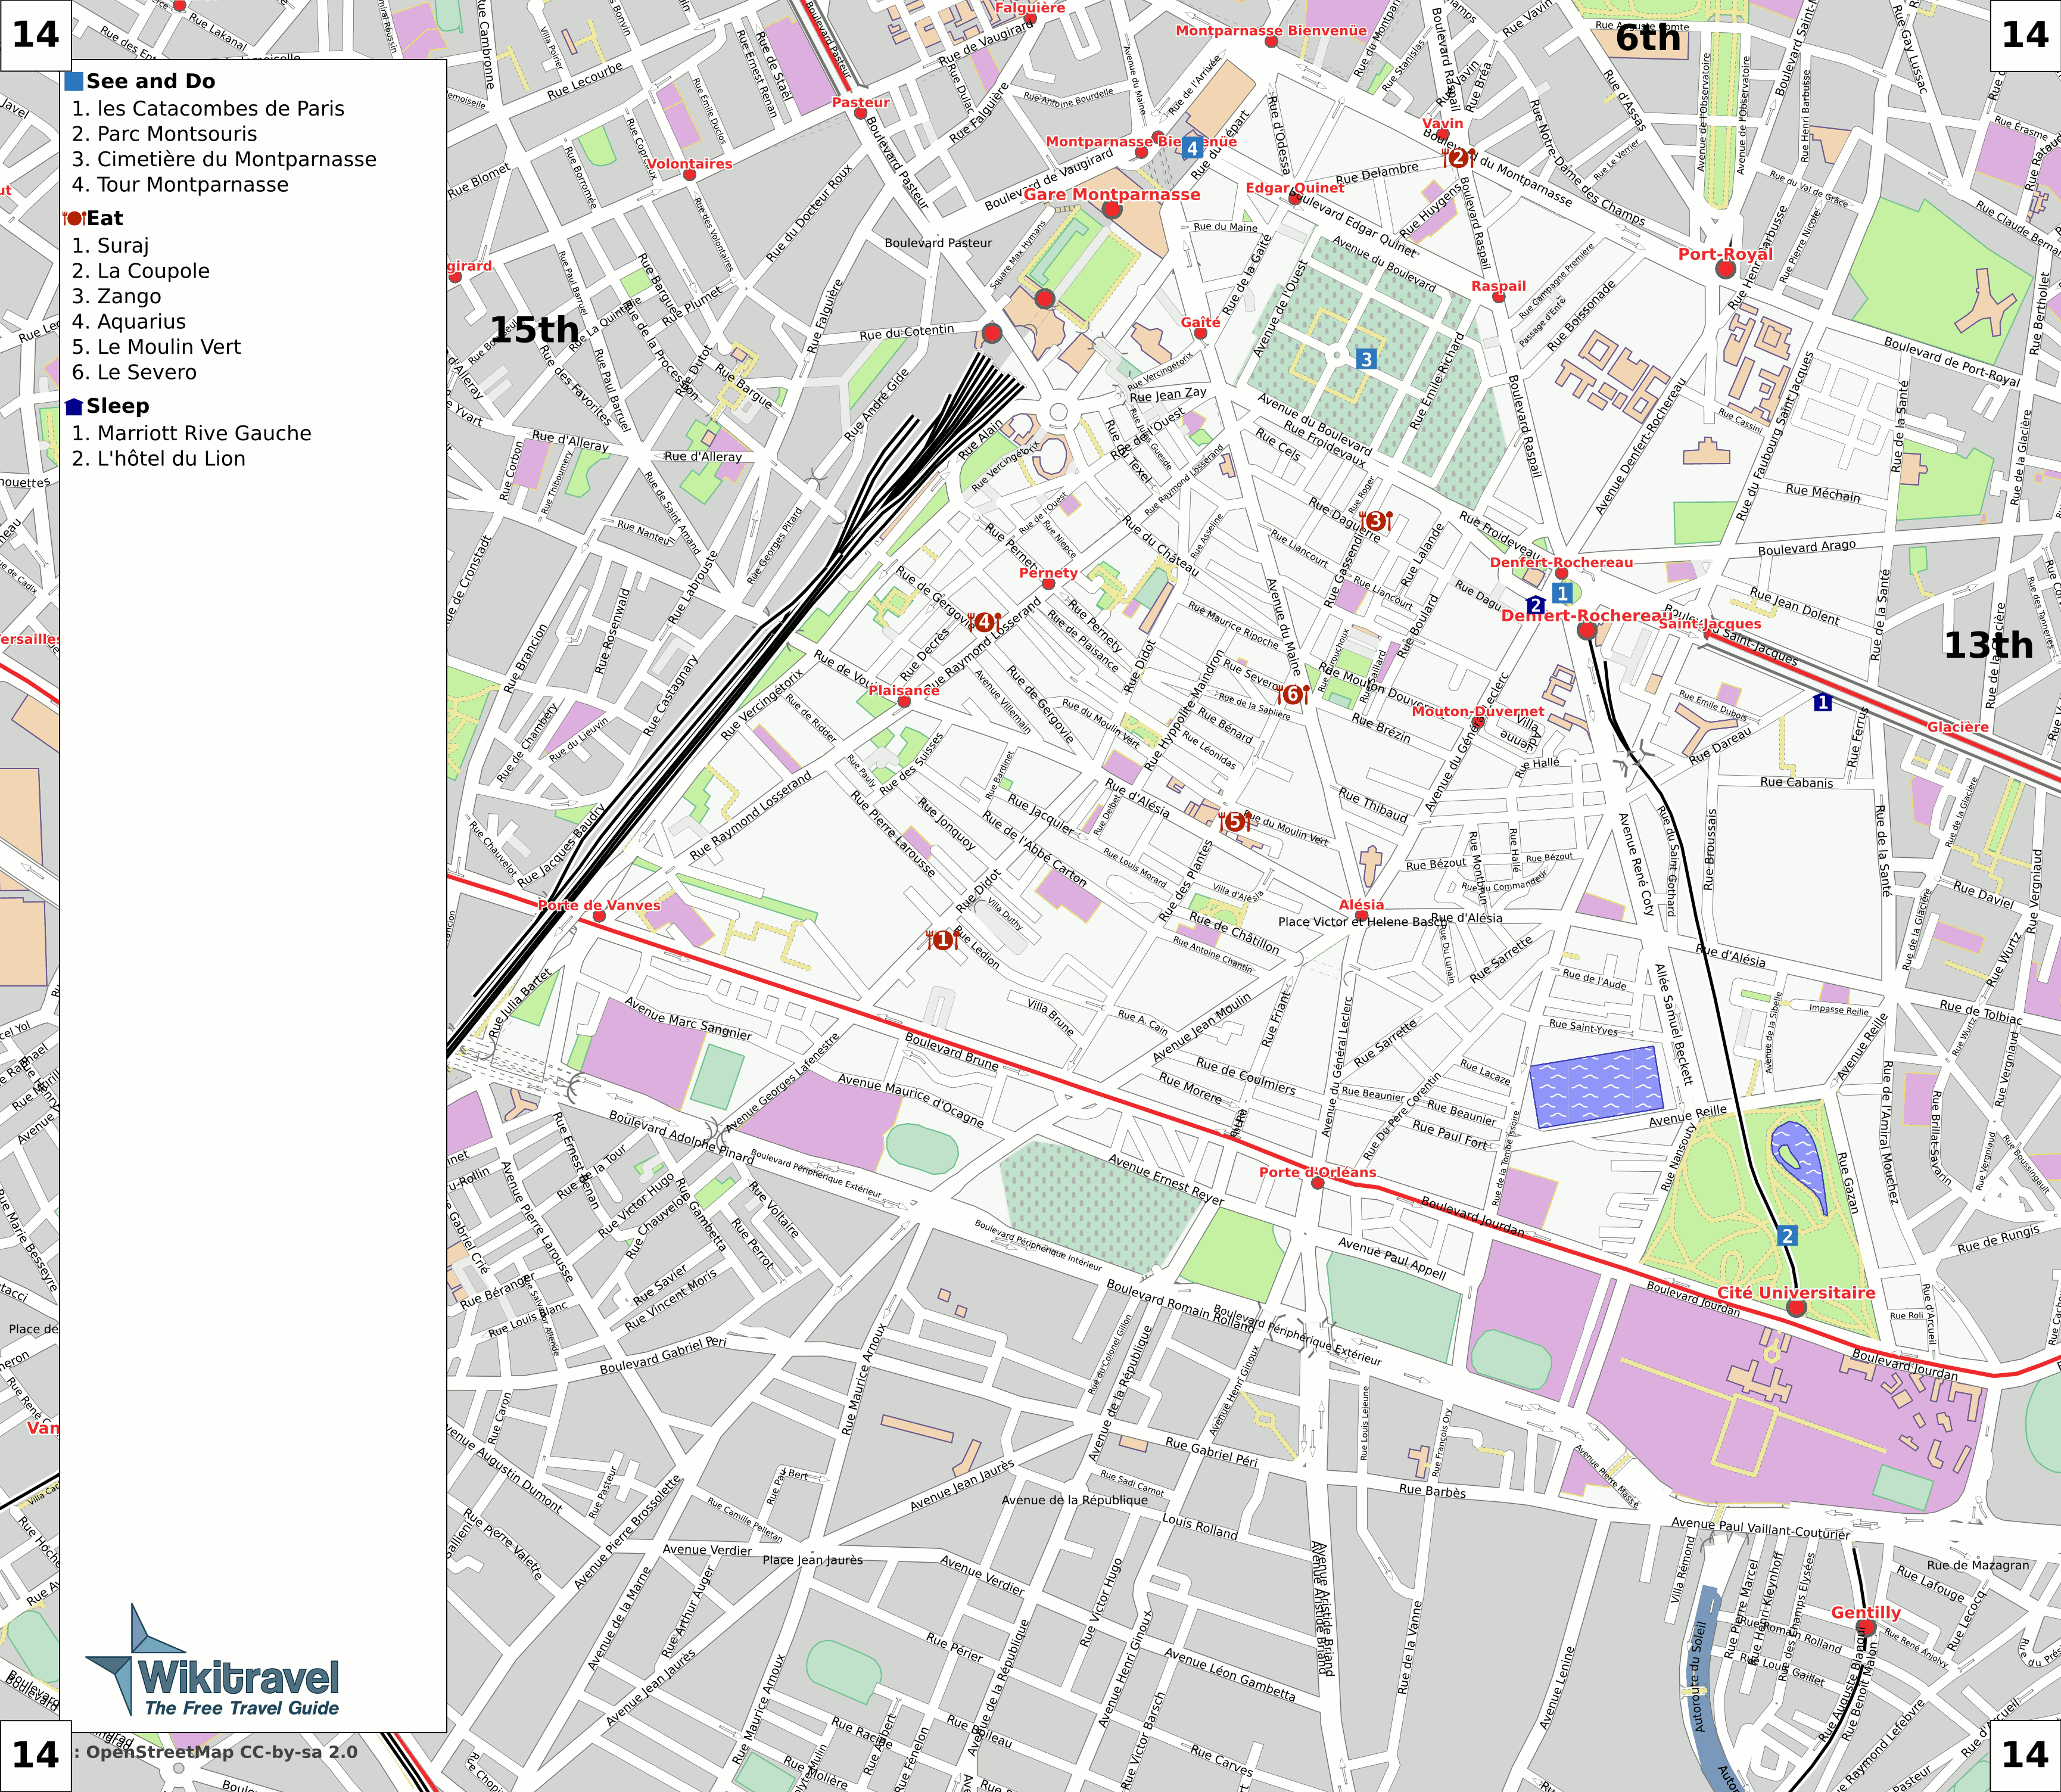 Paris 14th arrondissement map with listings.png